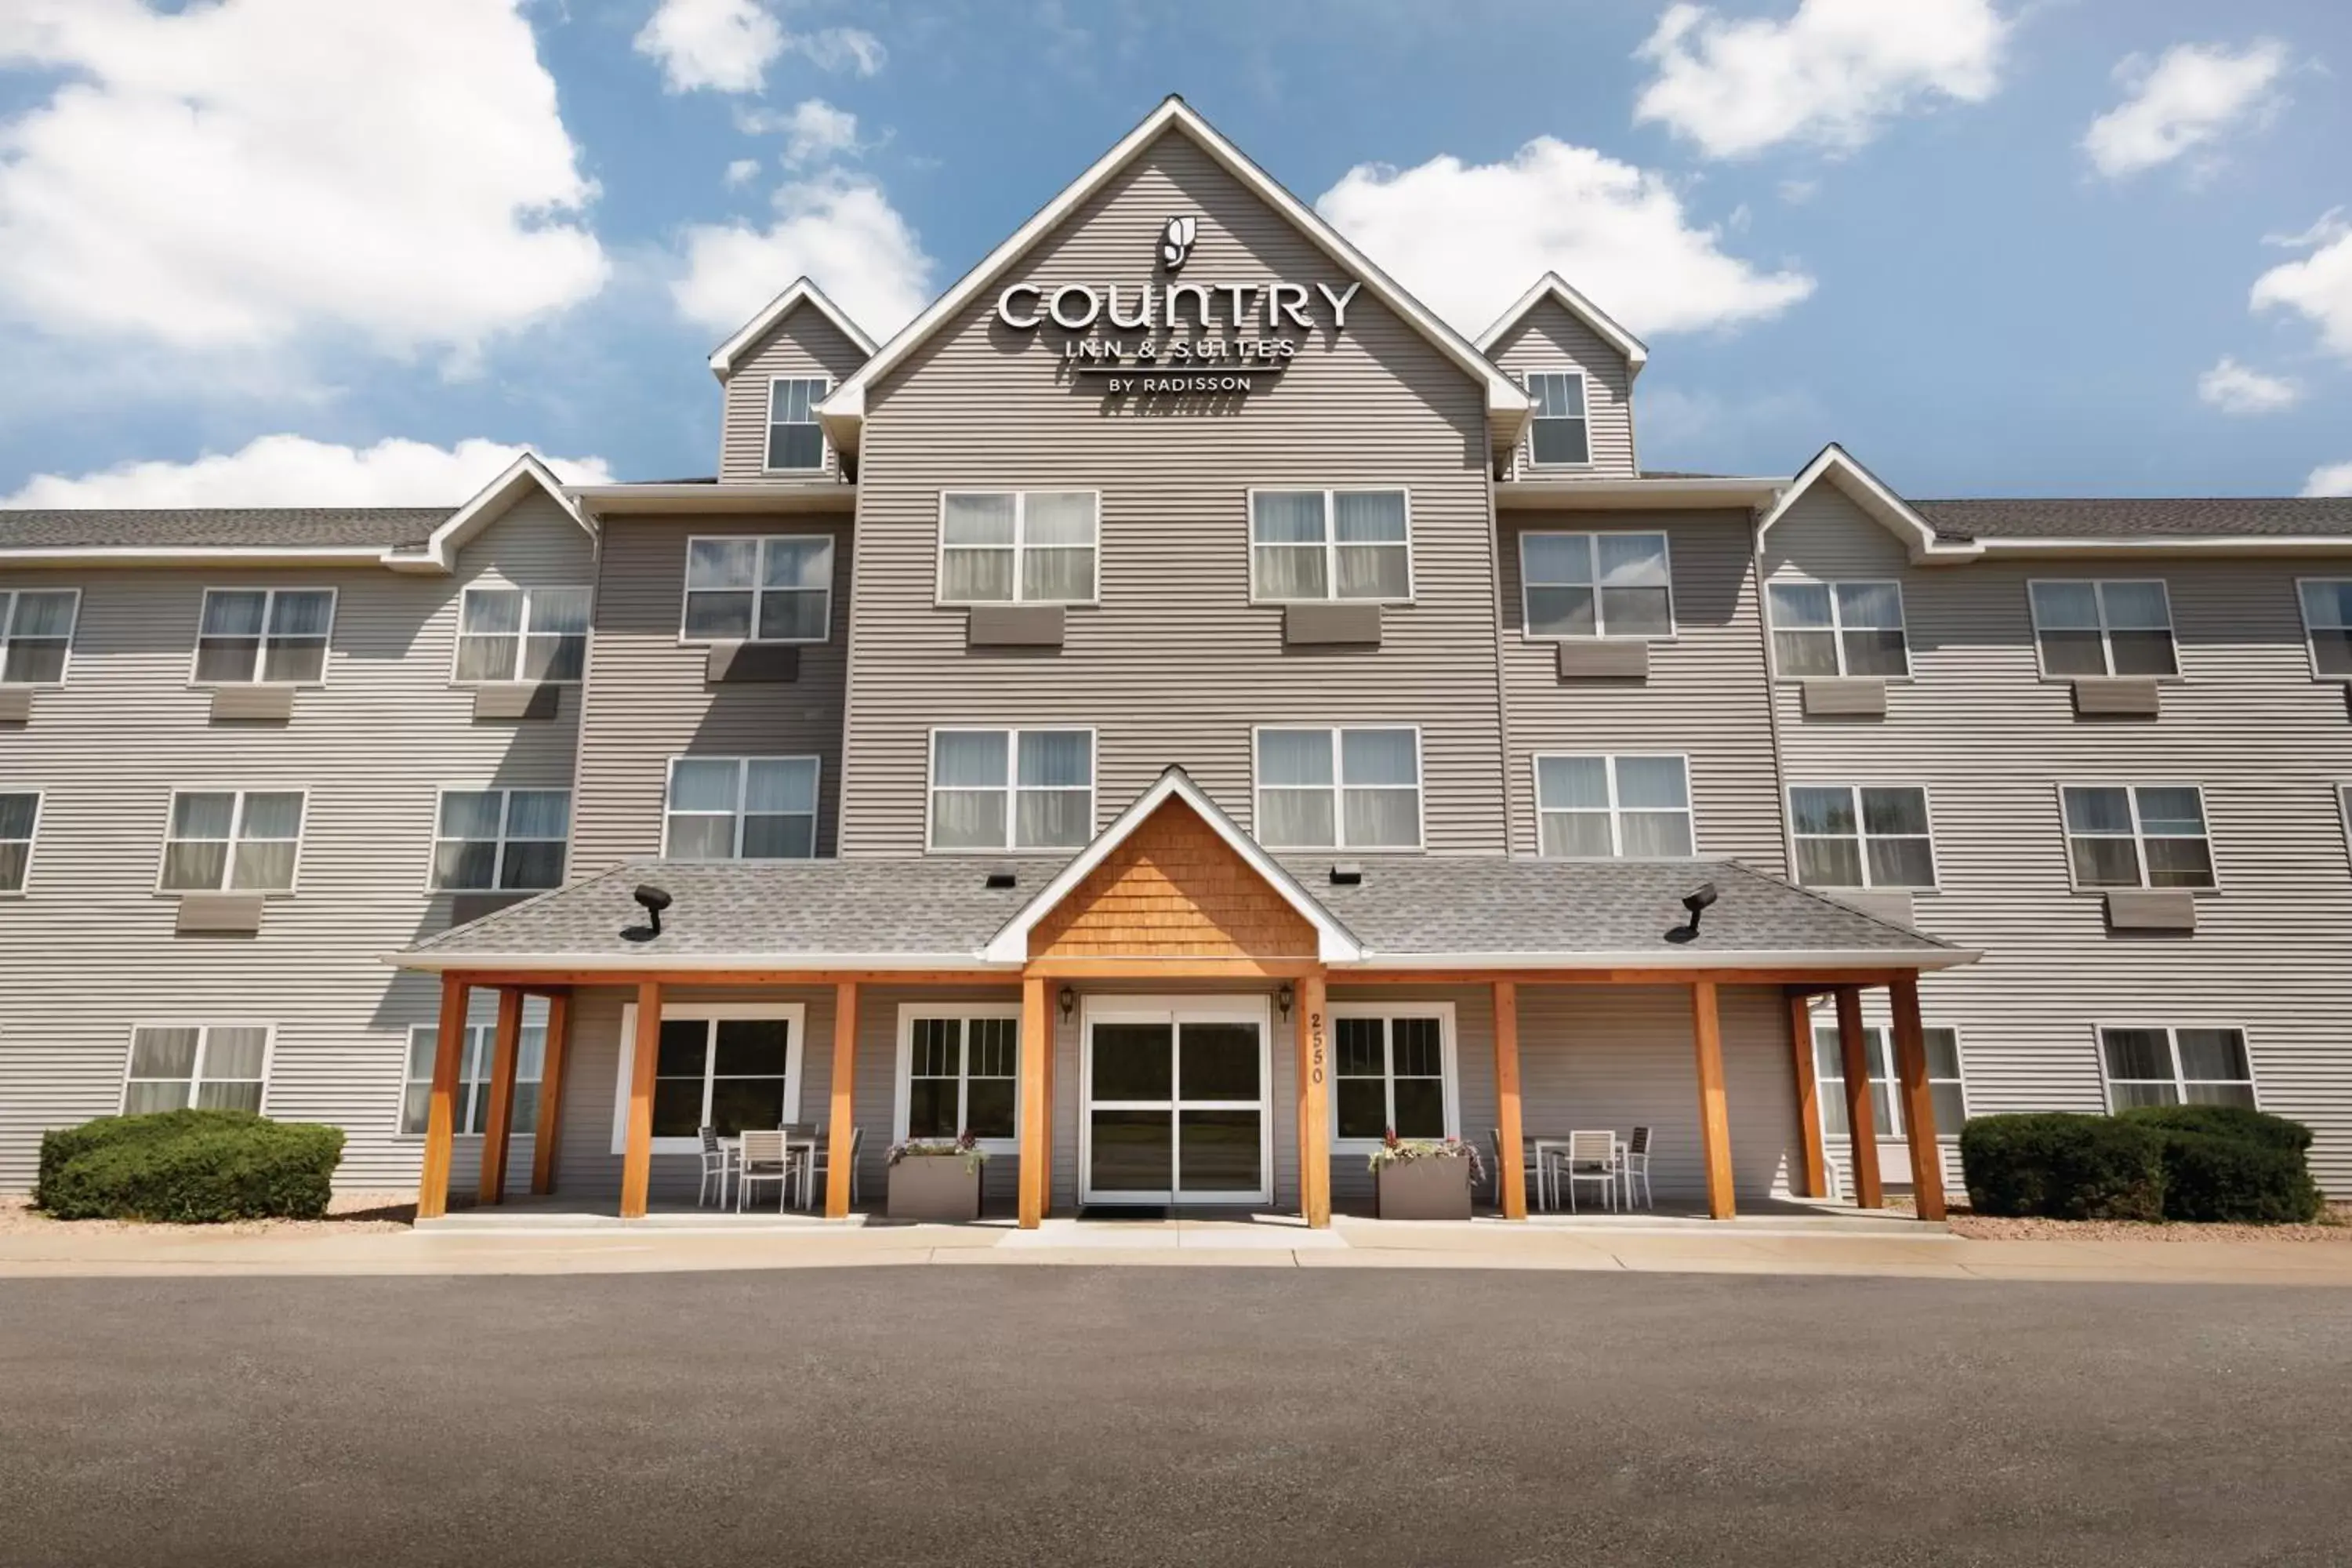 Facade/entrance, Property Building in Country Inn & Suites by Radisson, Brooklyn Center, MN